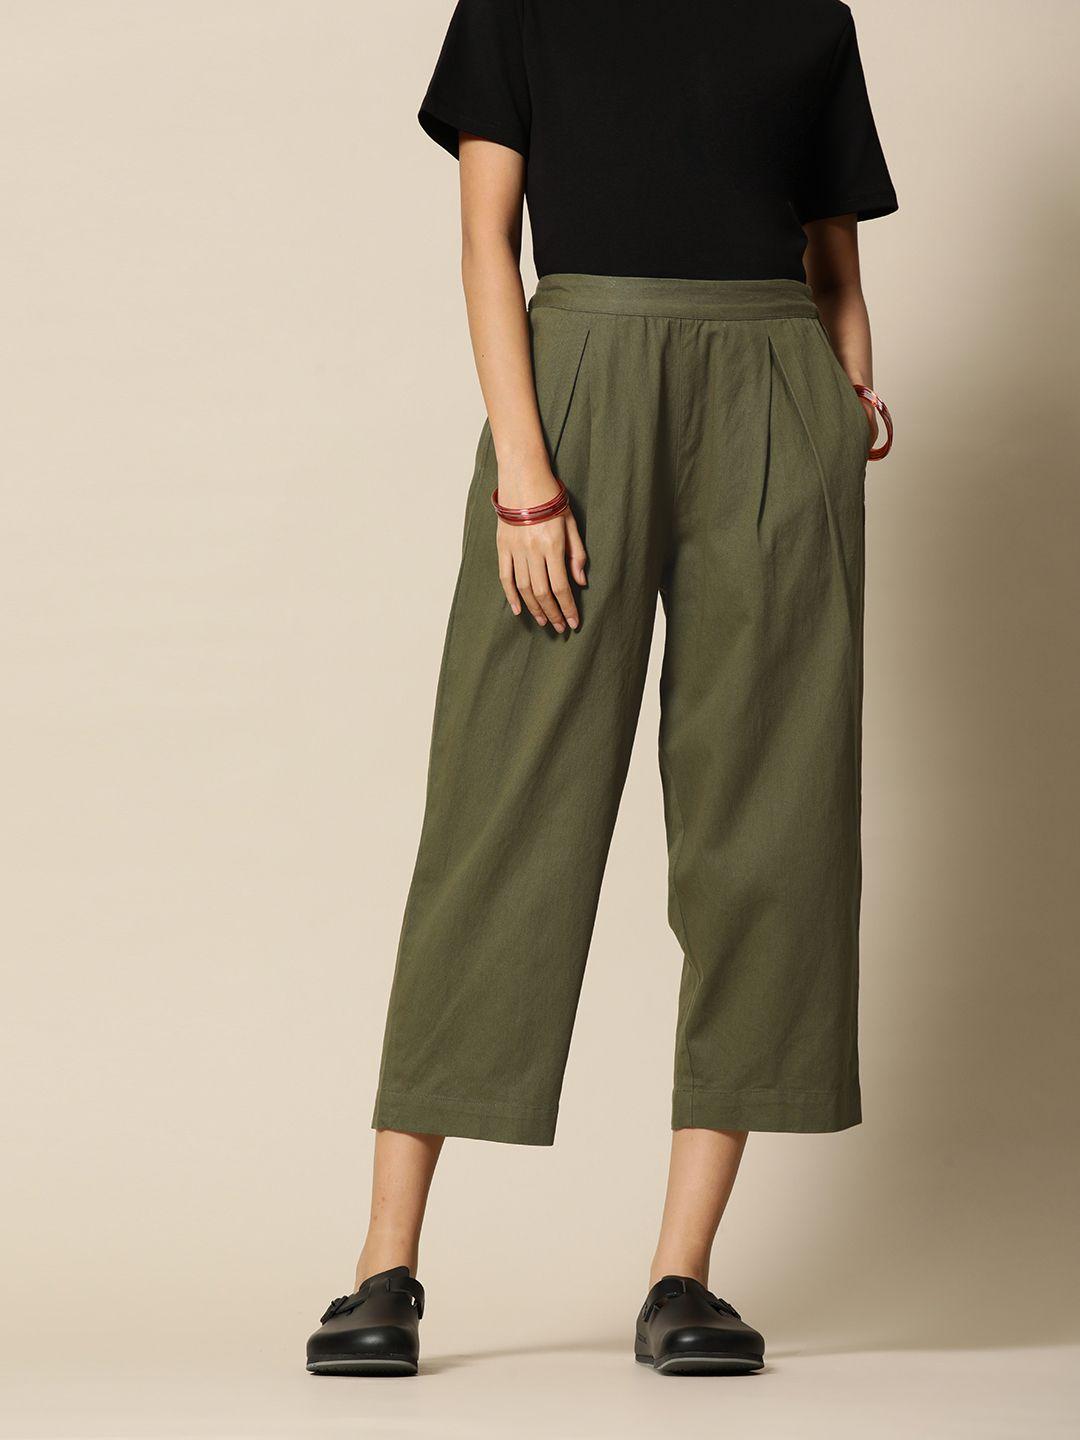 bower women olive green solid premium cotton twill relaxed cropped trousers